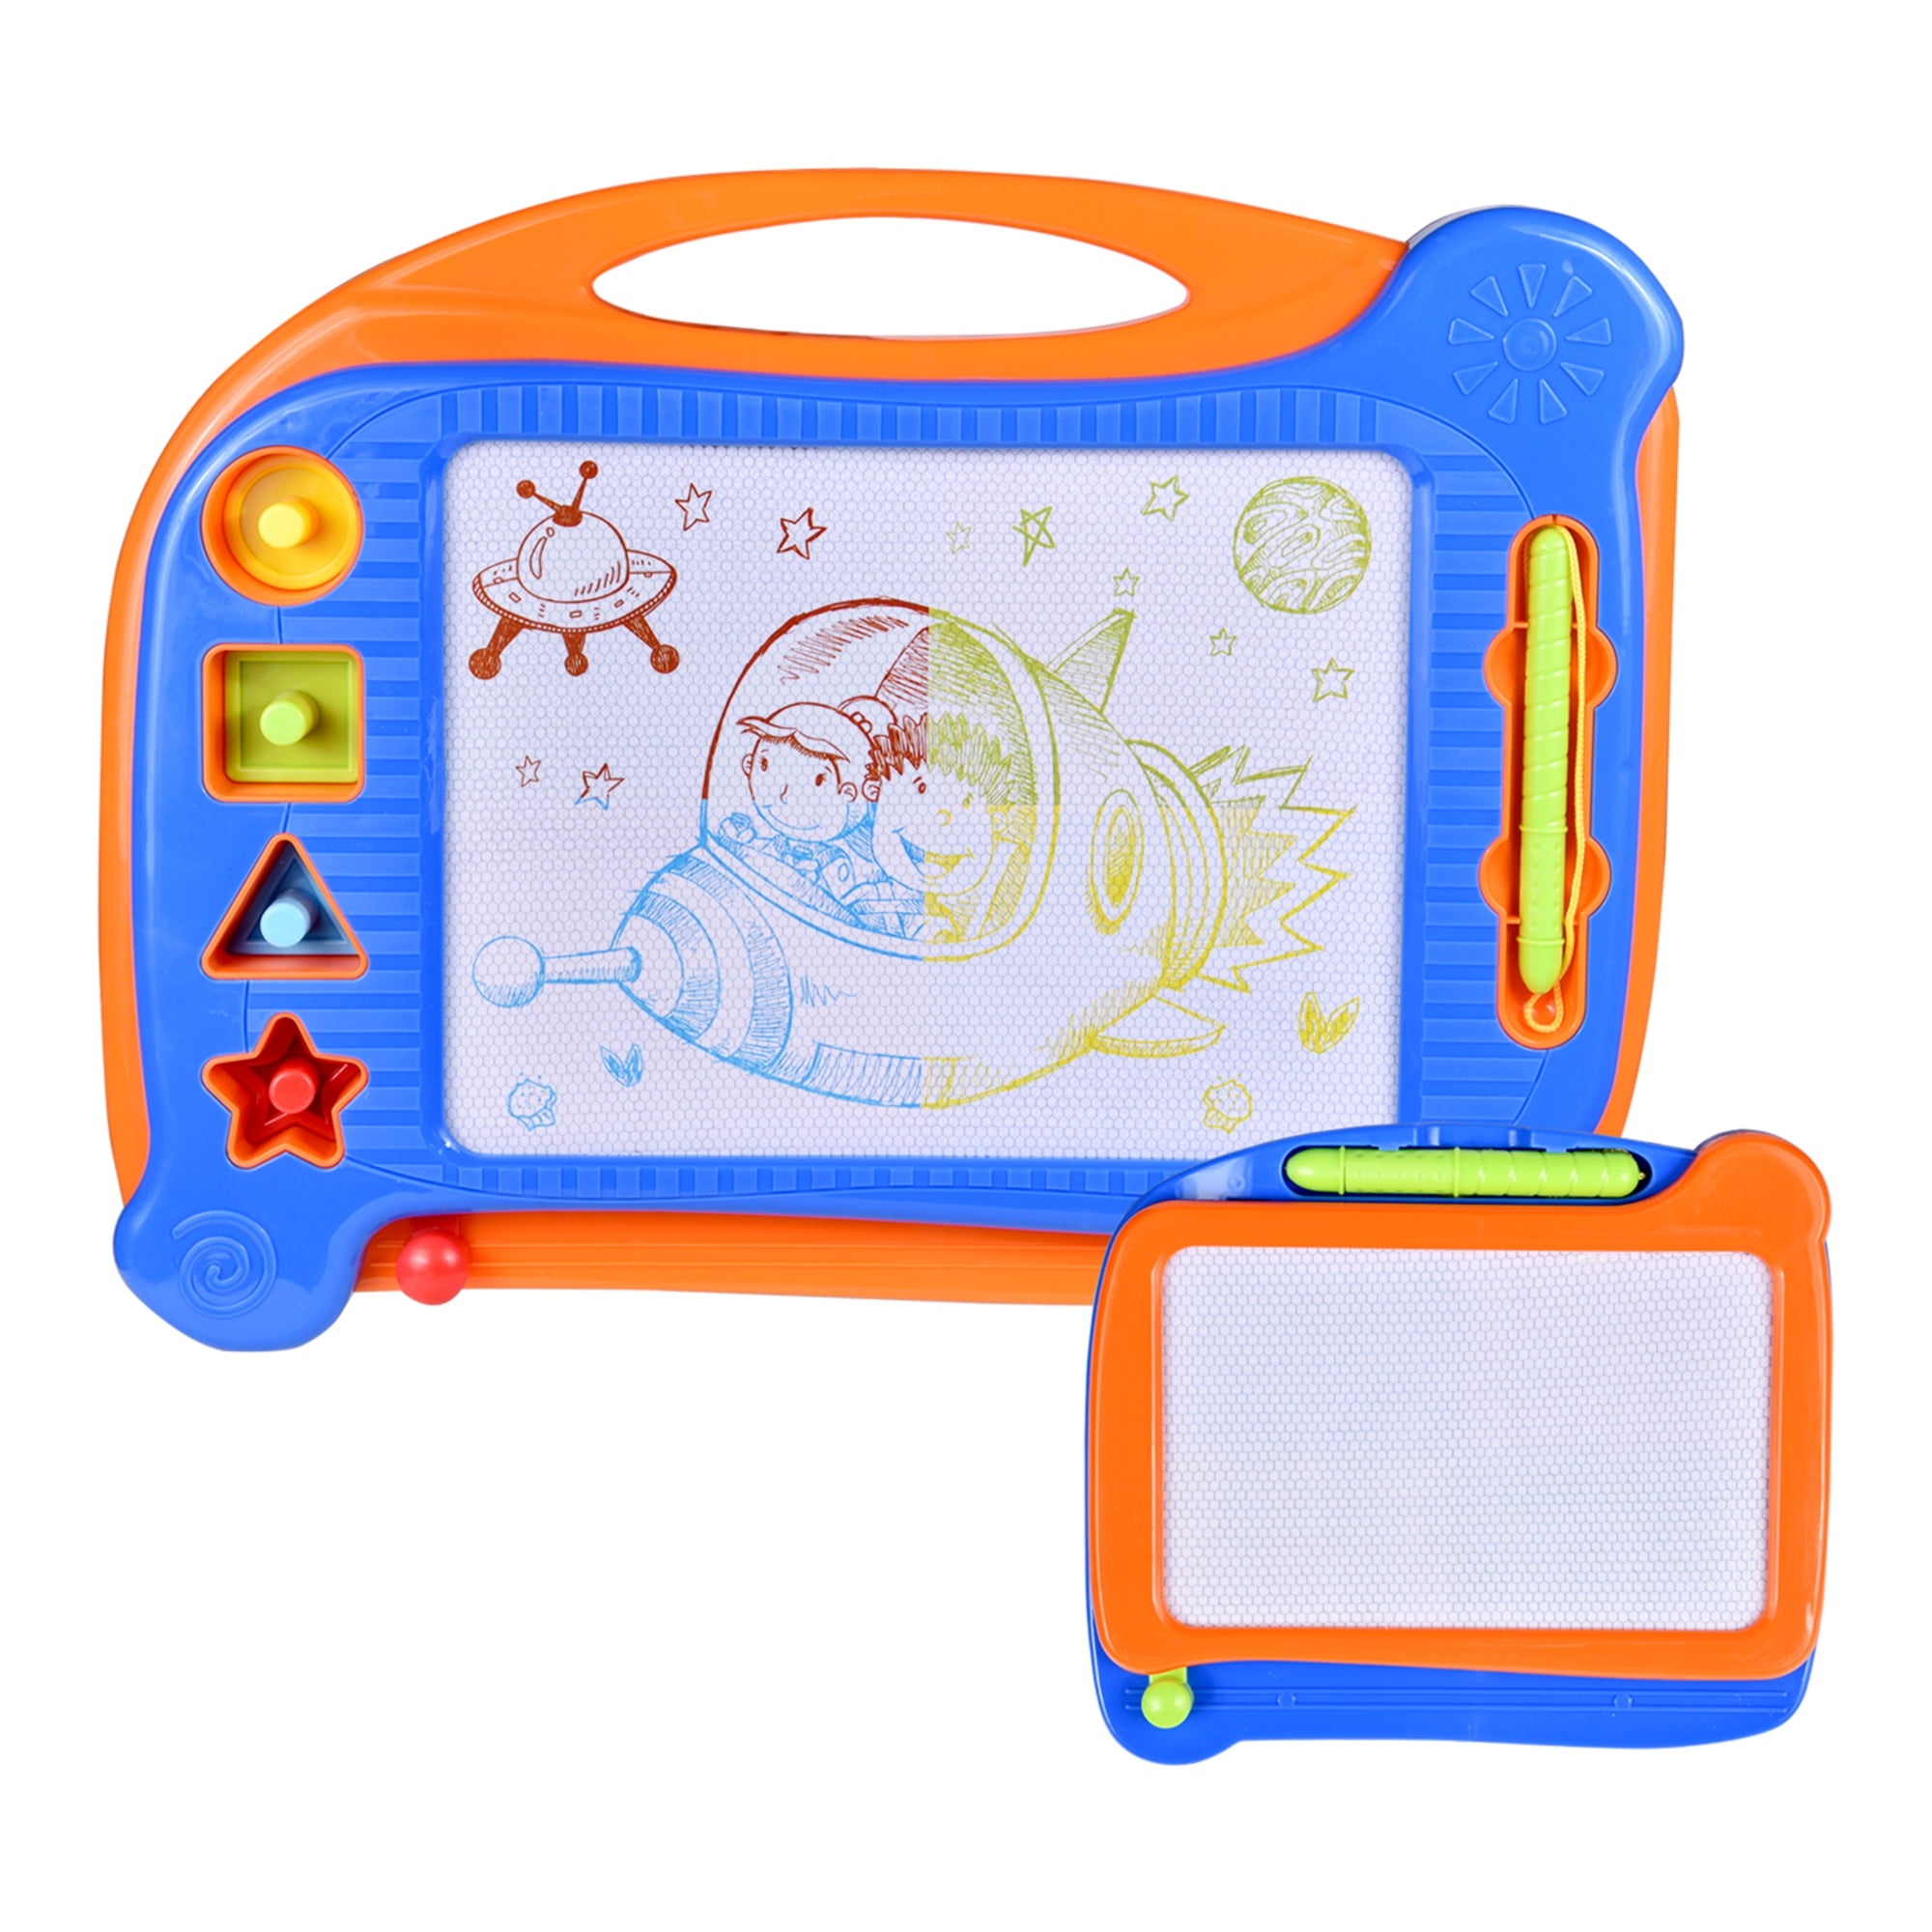 Odizli Magnetic Drawing Board Magna Scribble Doodle Sketch Pad Colorful Erasable Writing Painting Tablet Reusable Magic Draw Art Fun Education Developing Toy Gift with Stamps and Pen for Kids Blue